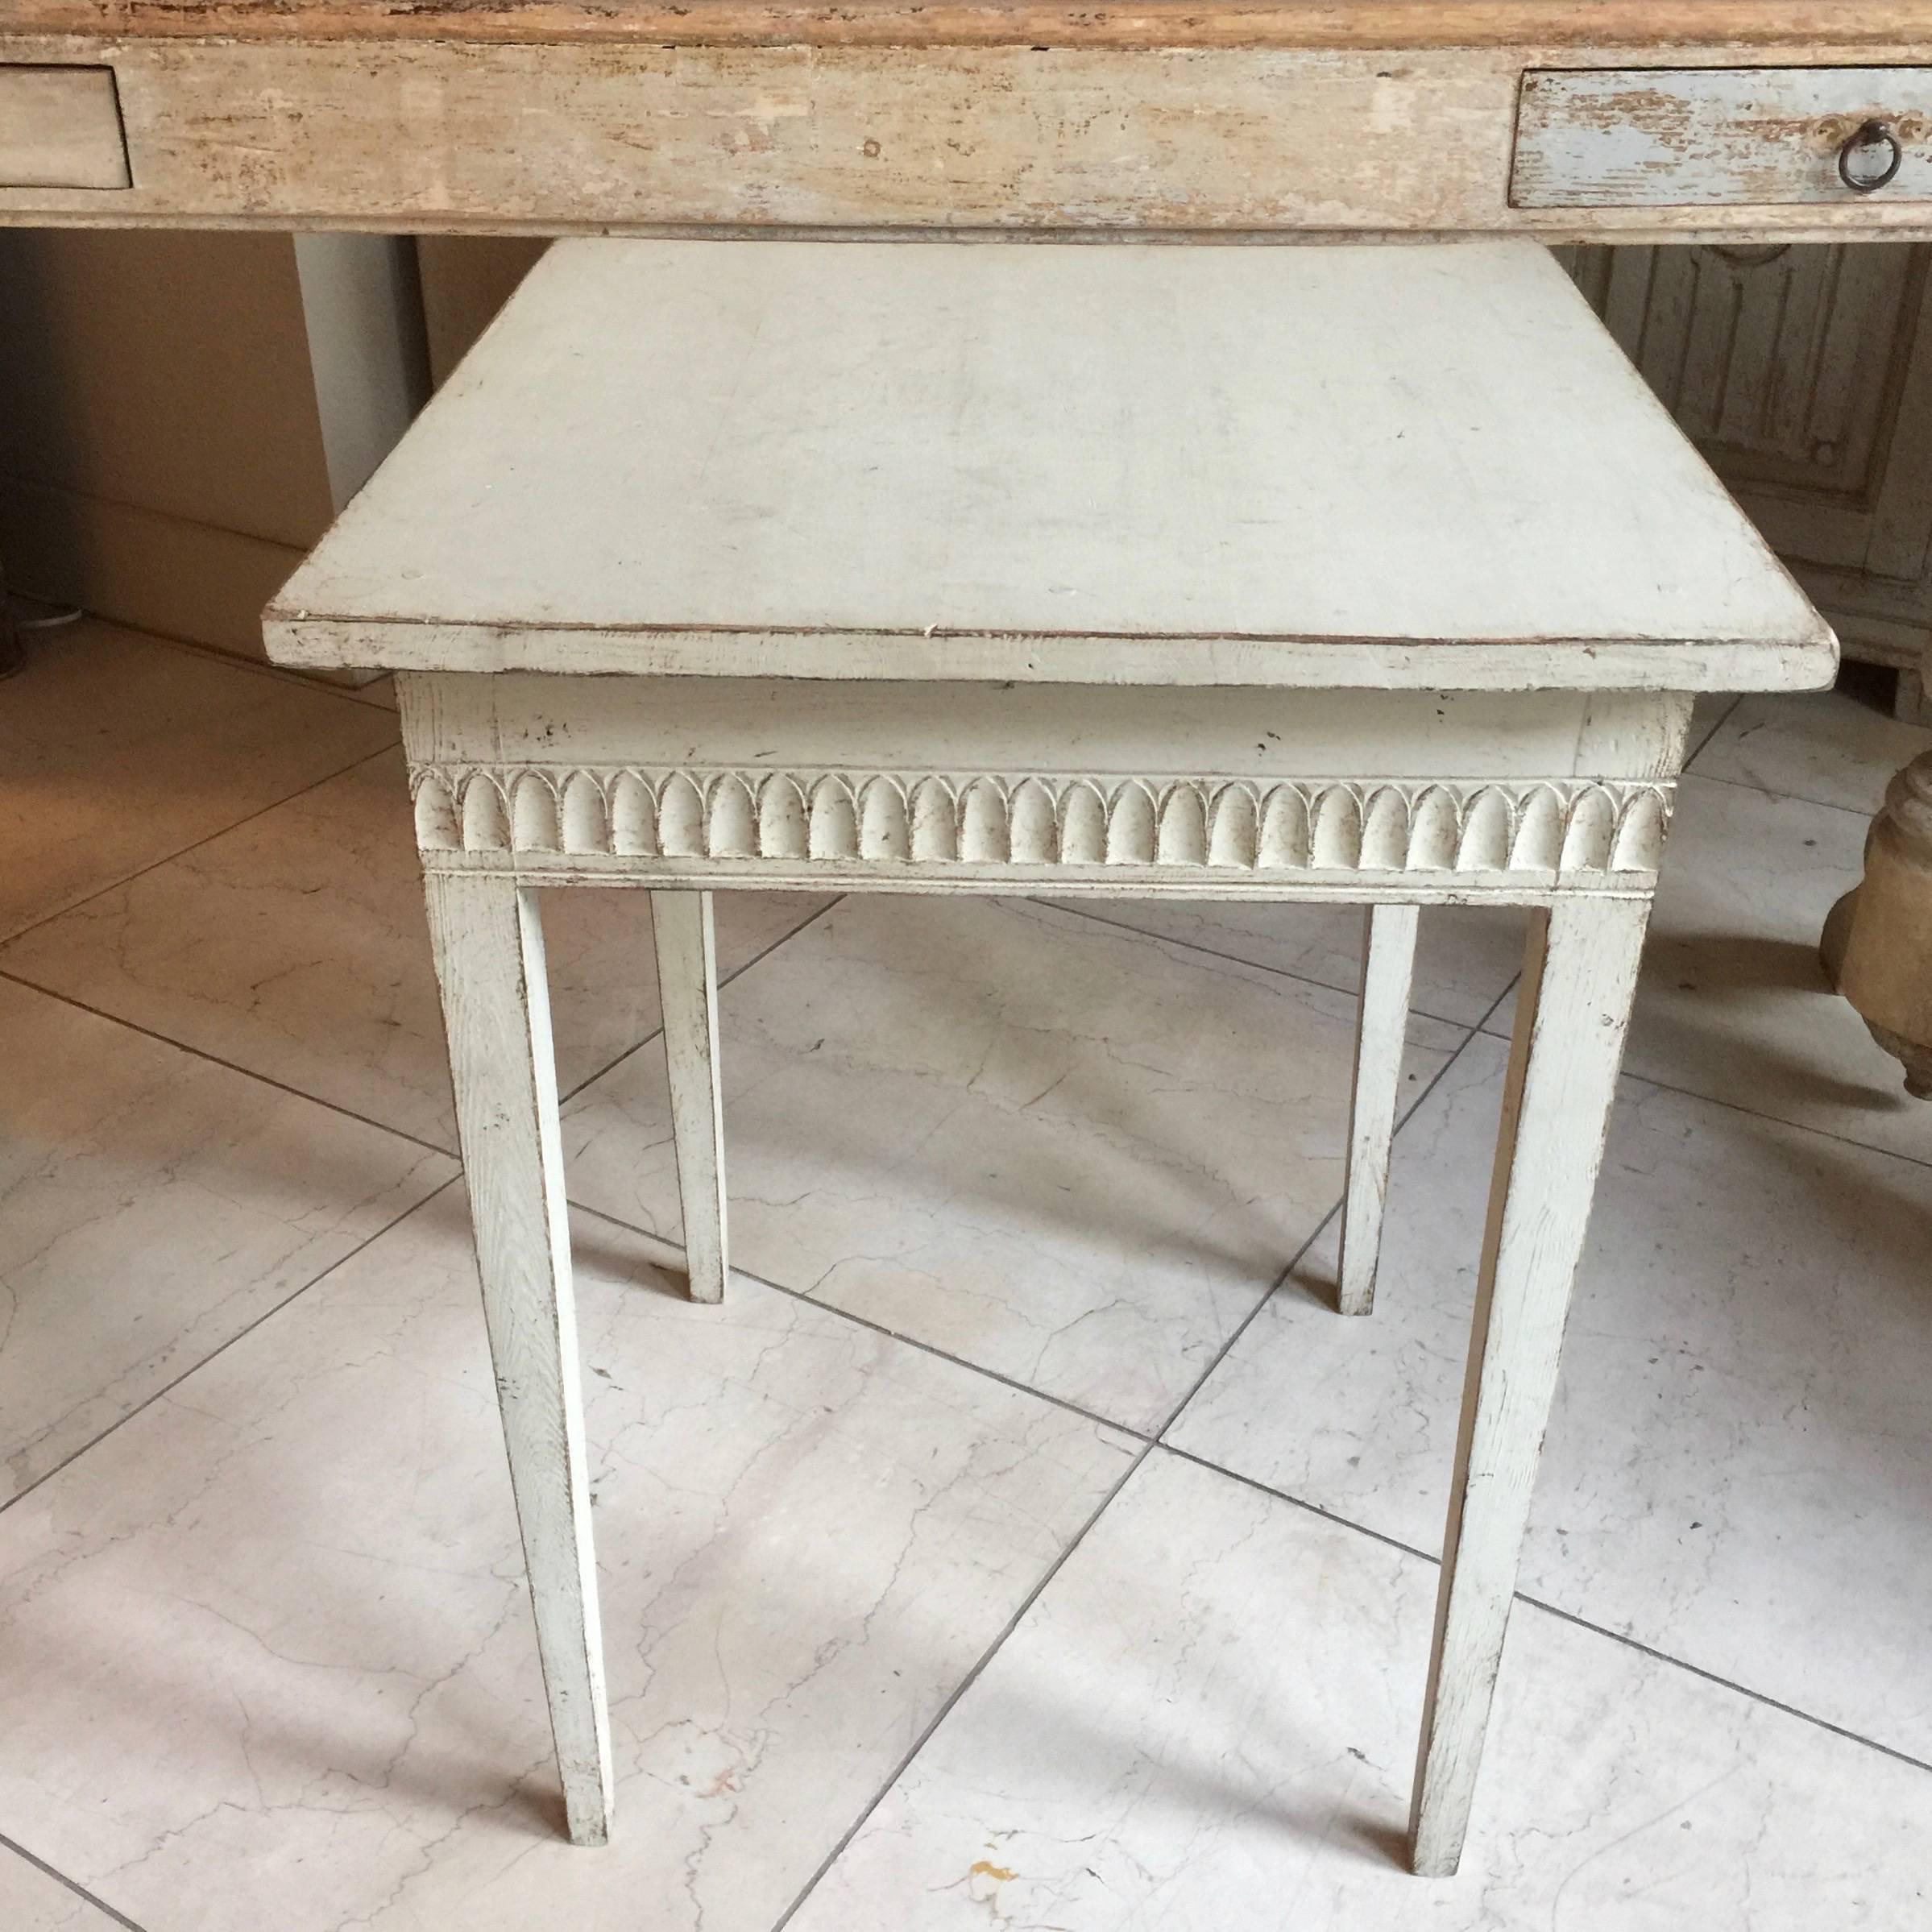 19th century Swedish Gustavian style side table with lambs tongue carving on the apron and slender tapered legs.
More than ever, we selected the best, the rarest, the unusual, the spectacular, the most charming … what makes people dreaming!